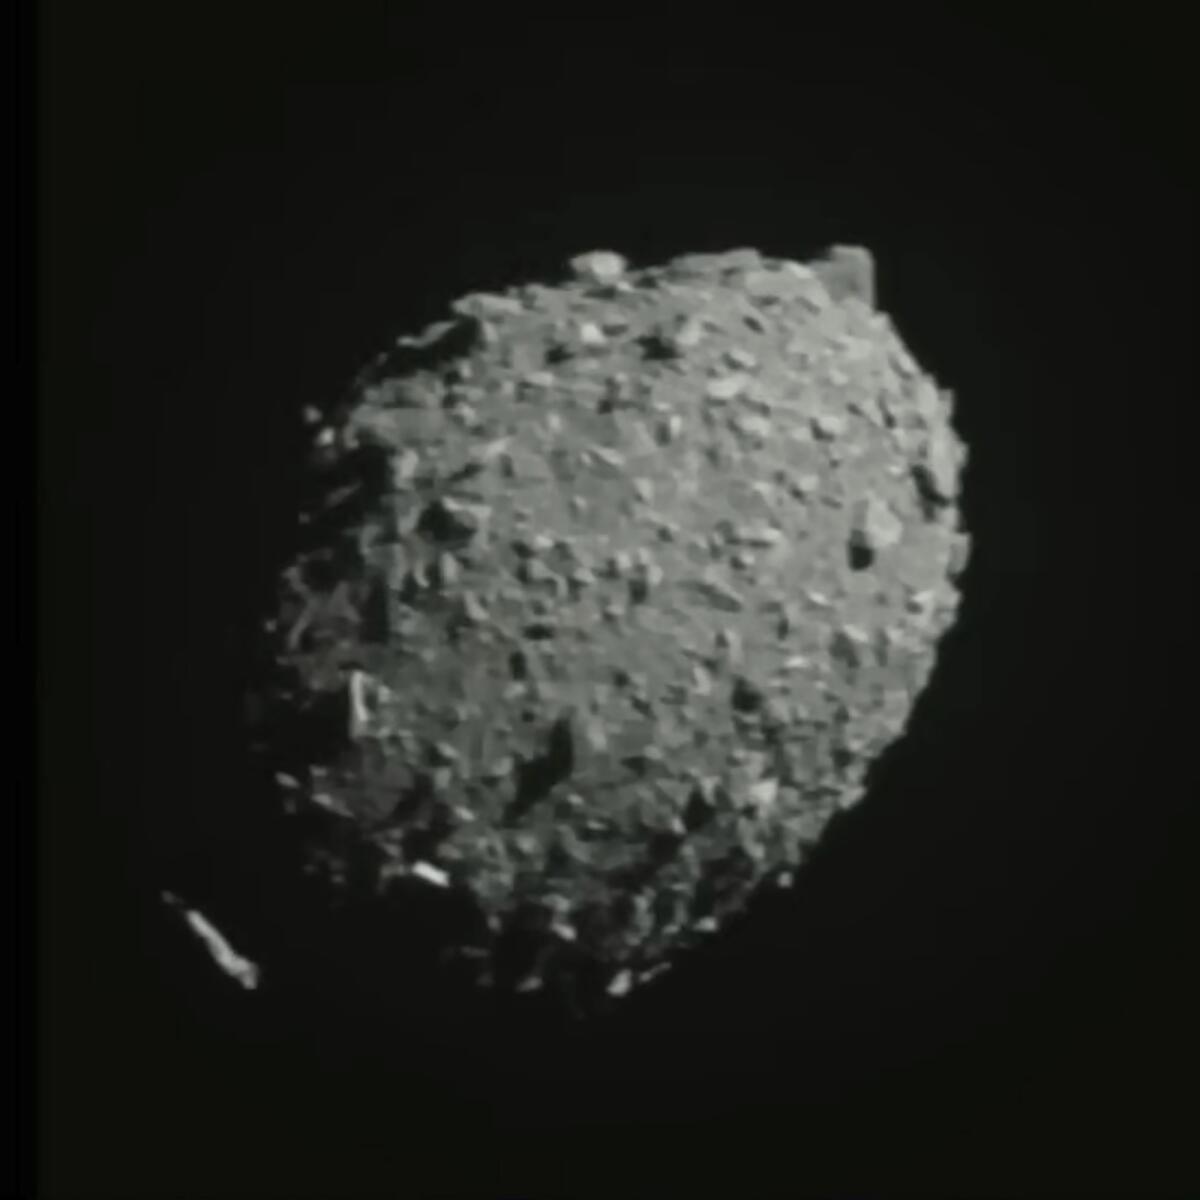 A gray object shaped like a lemon, with an uneven surface, is seen against a dark background 